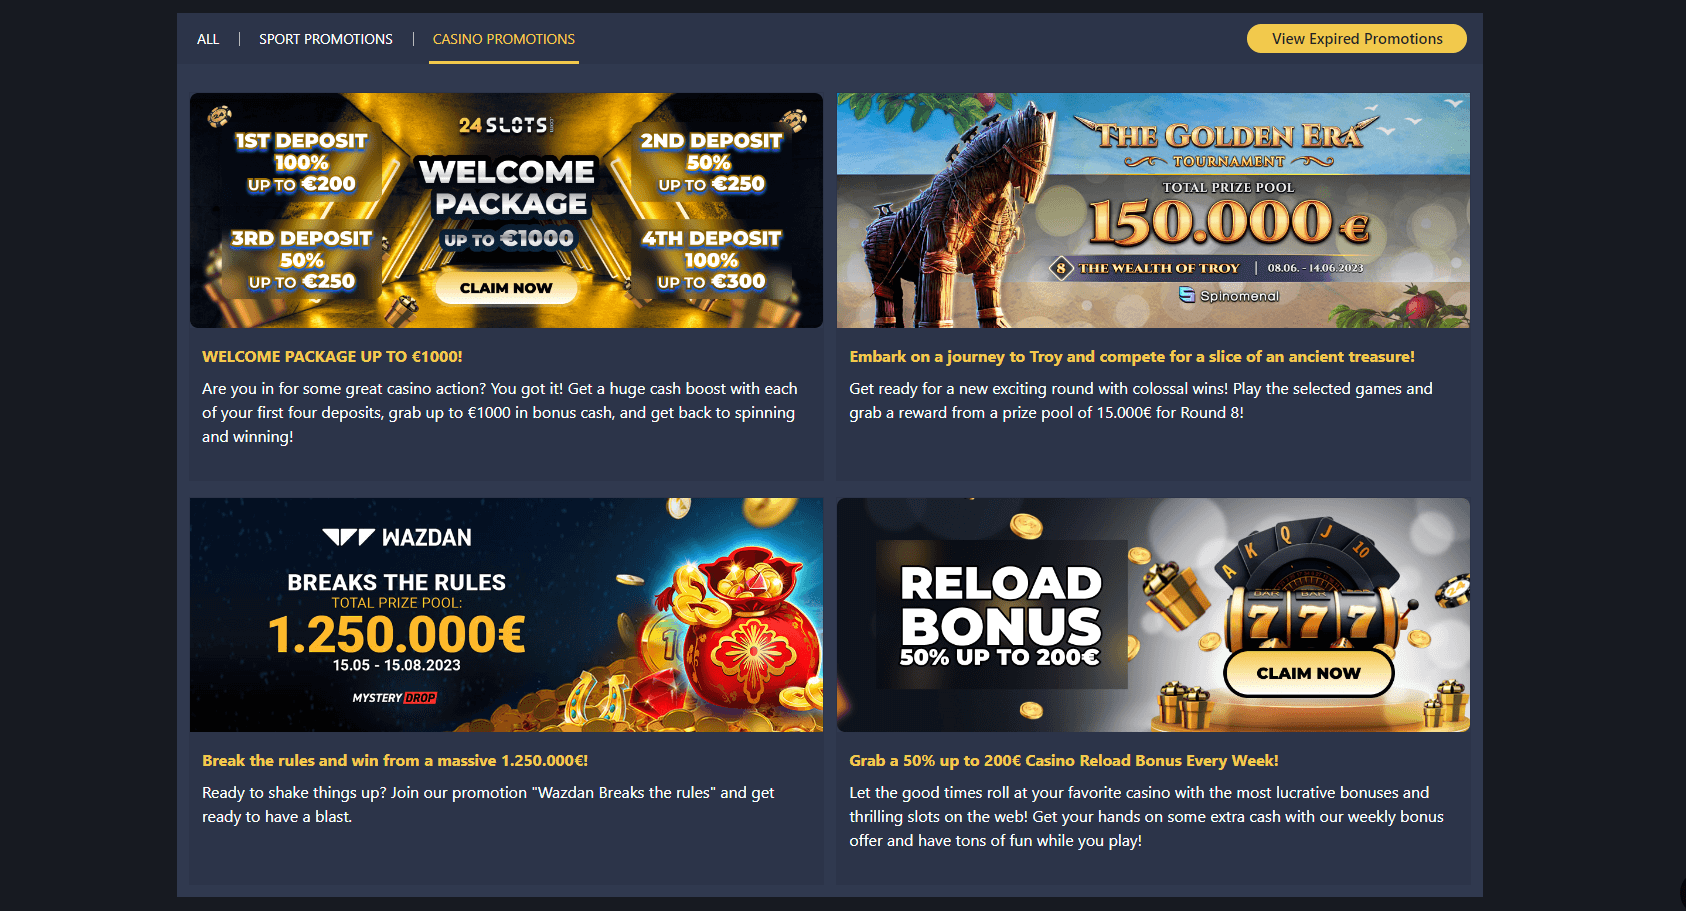 Bonuses and Promotions 24slots Casino